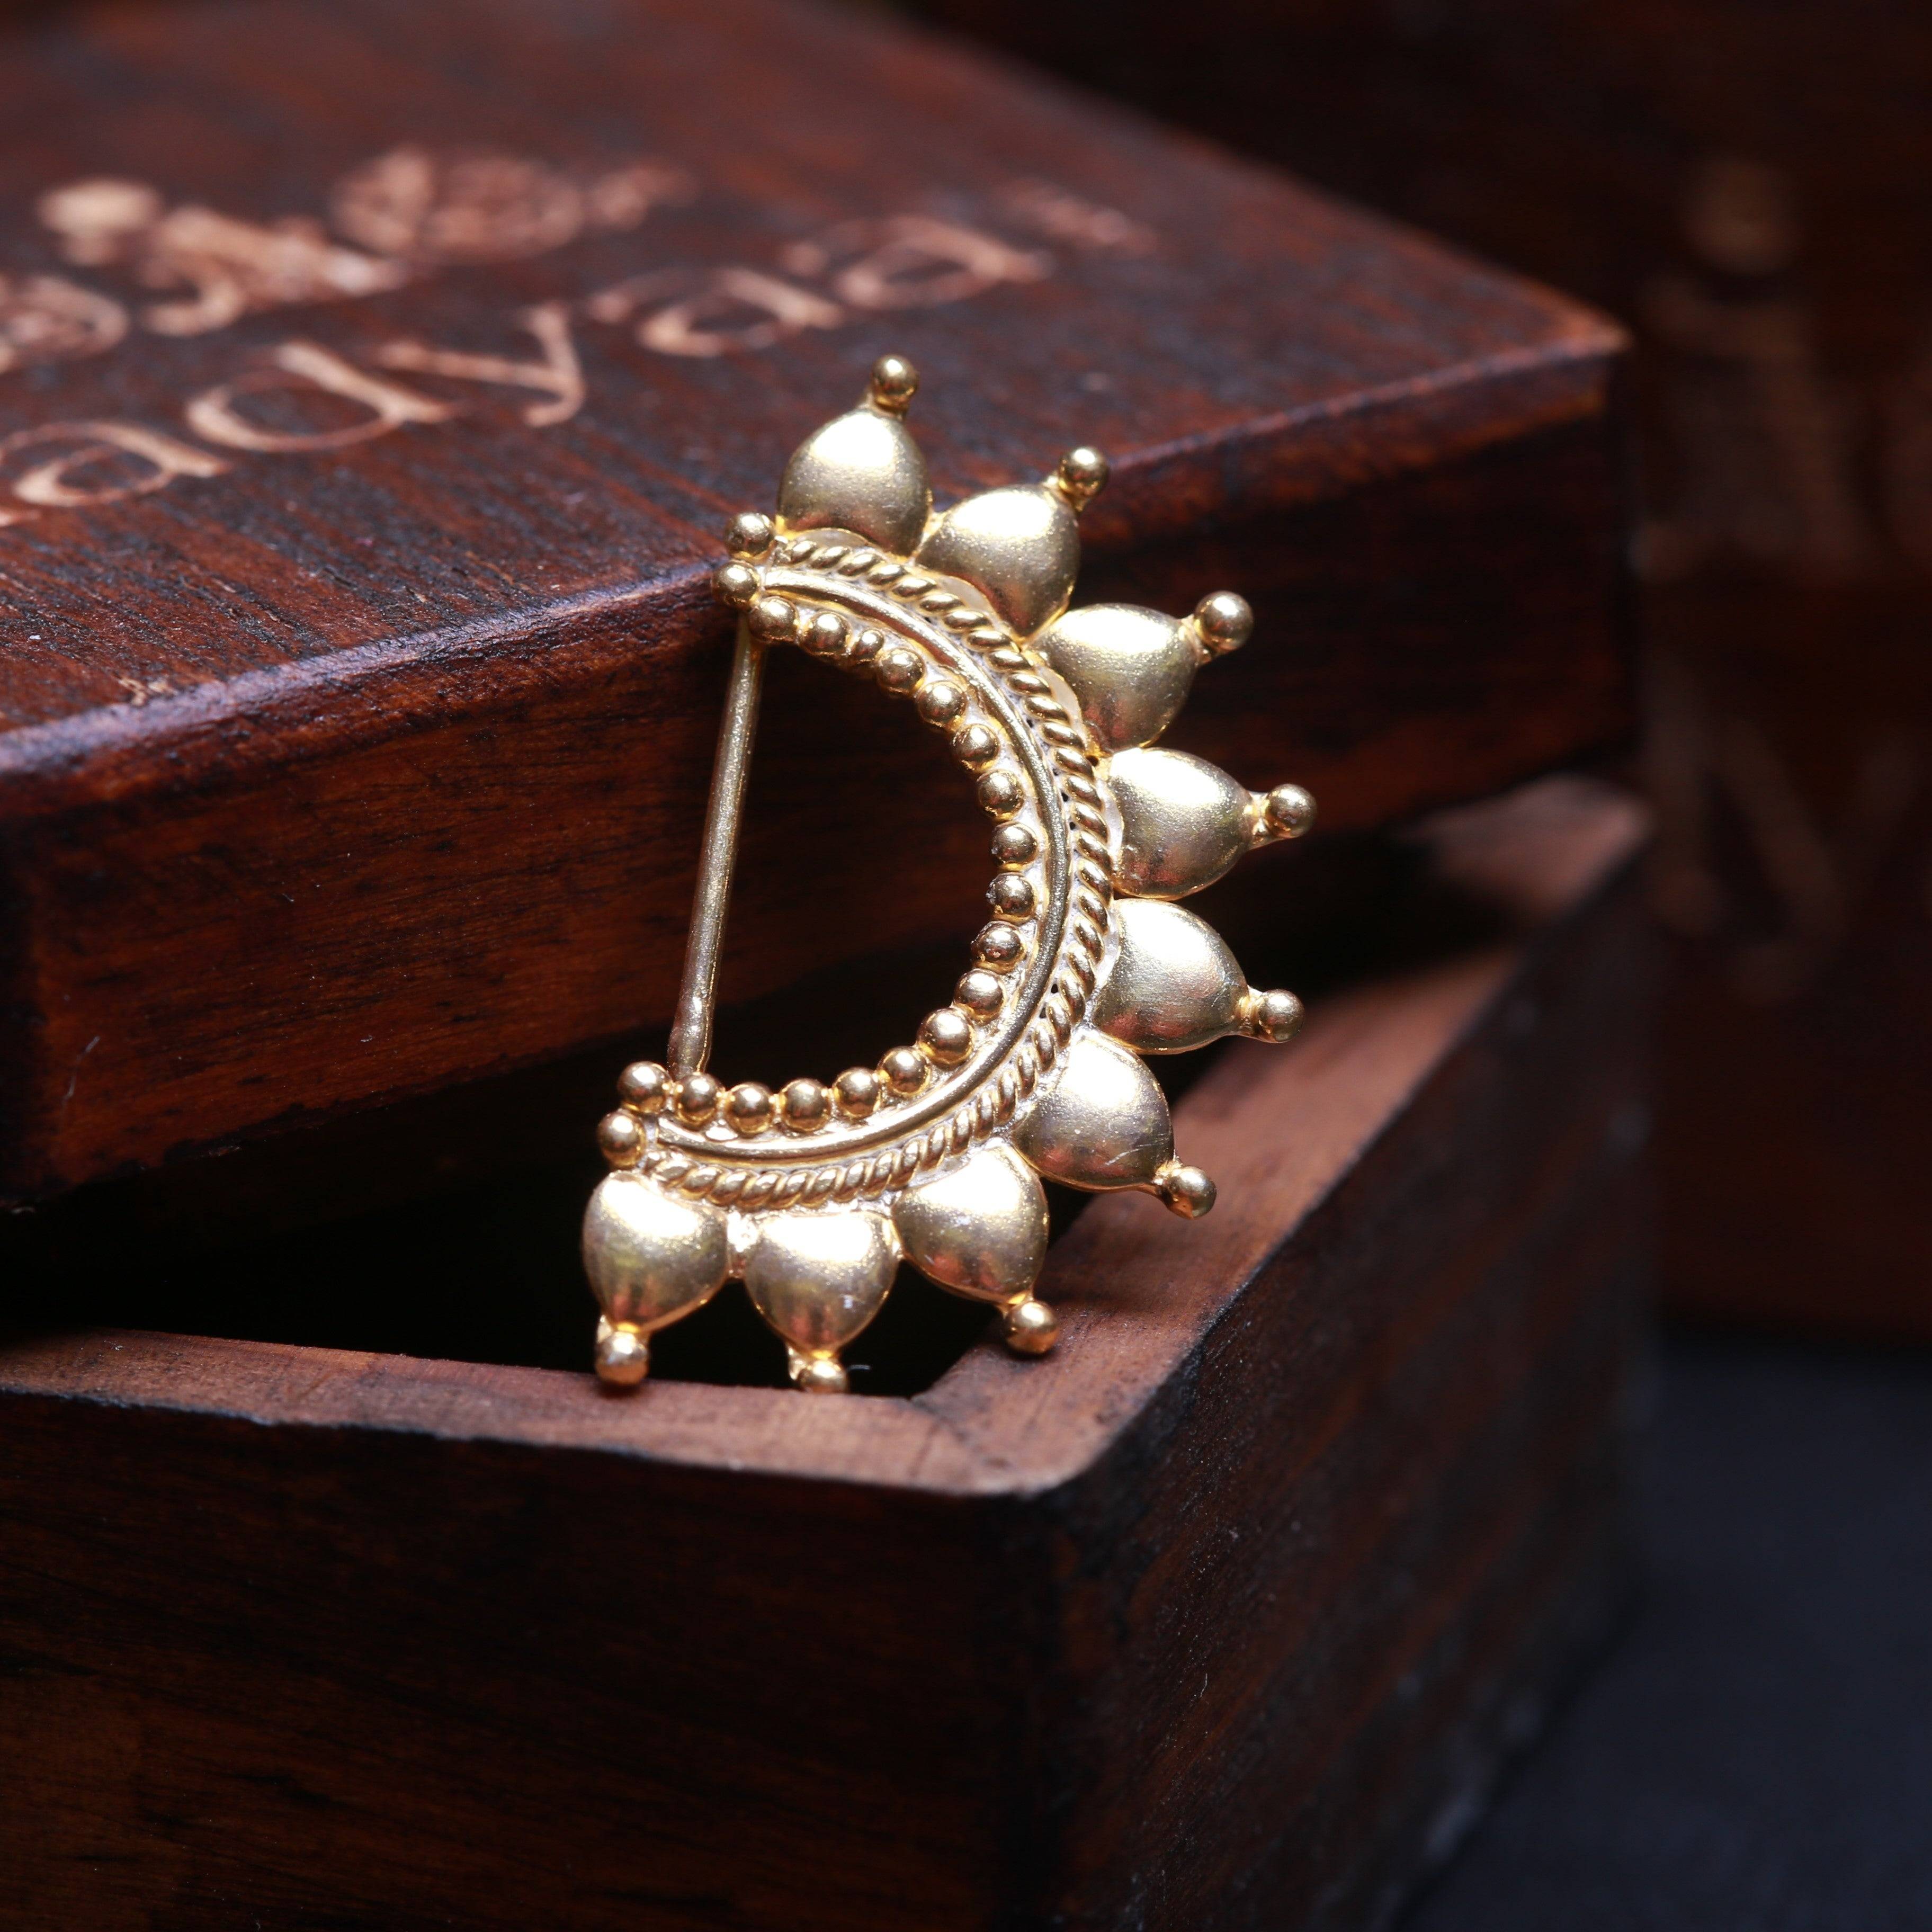 a close up of a pair of earrings on a wooden box